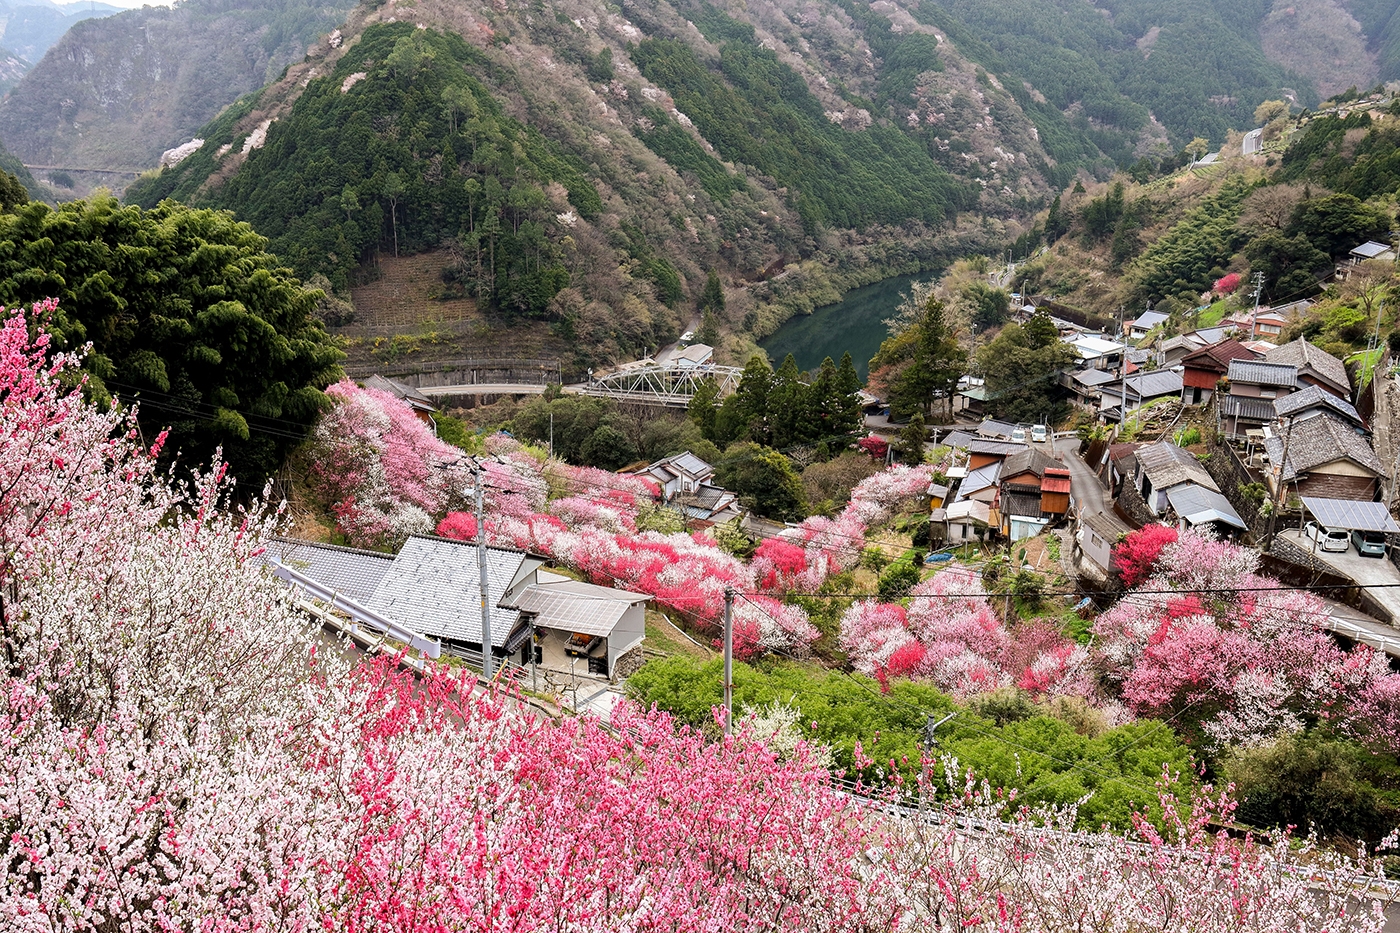 Niyodogawa Town's Teramura District in Kochi Prefecture bursts with color, showcasing nature's vibrant palette in a picturesque display